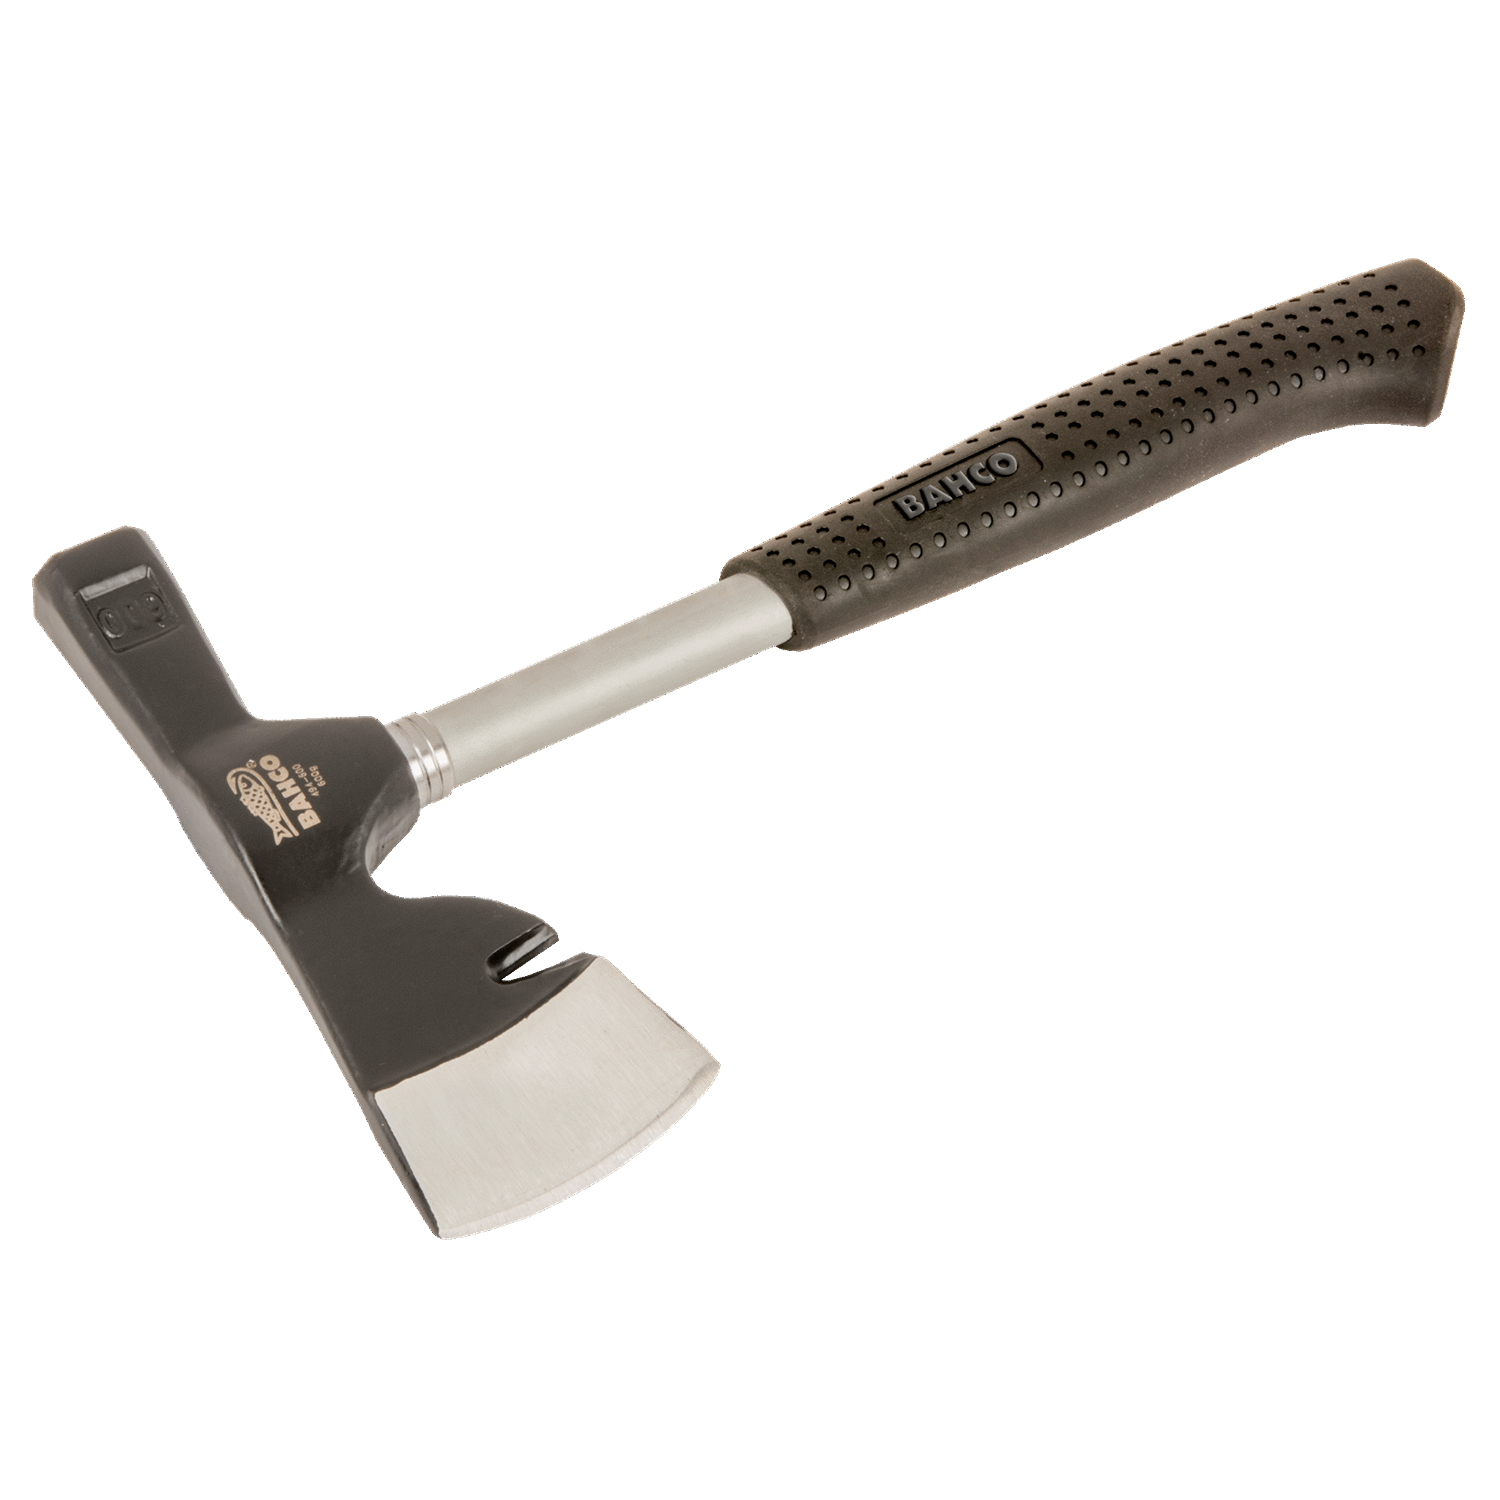 BAHCO 494 Plaster Hatchet Hammer with Tubular Steel Shaft - Premium Plaster Hatchet Hammer from BAHCO - Shop now at Yew Aik.